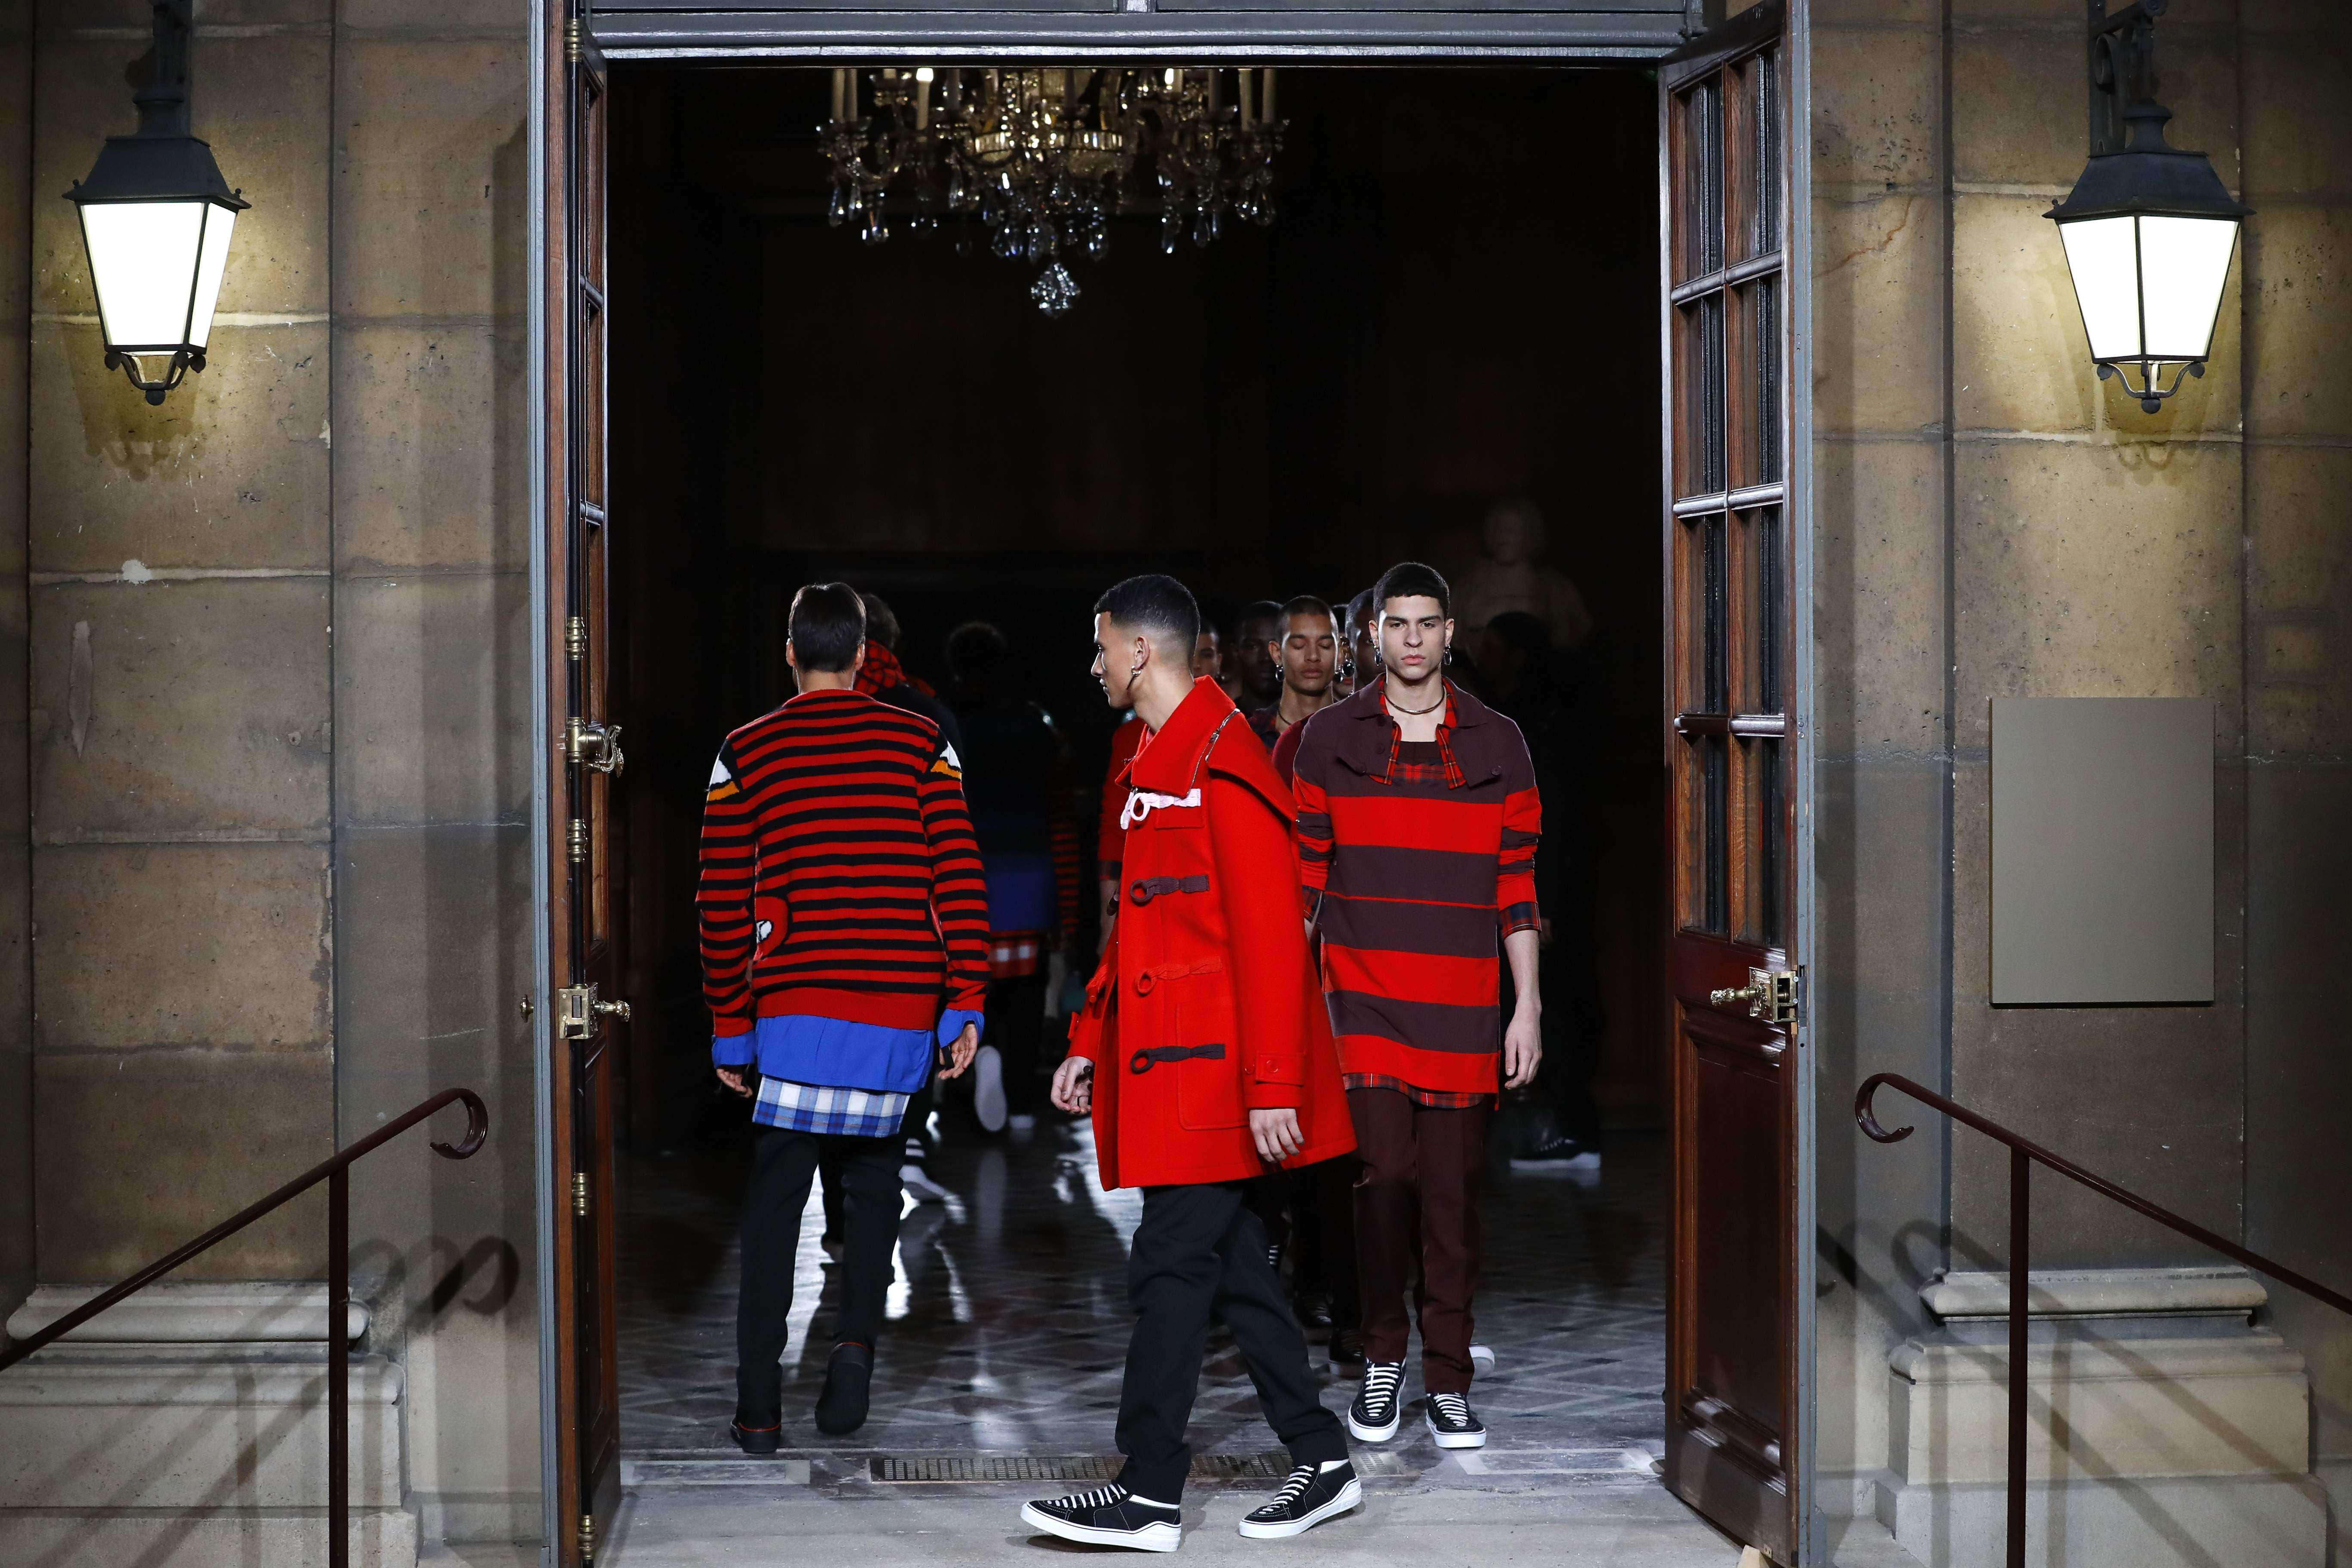 Balenciaga’s Demna Gvasalia couldn’t resist a statement as Donald Trump is sworn in as US president  and others such as Lanvin, Lemaire, Kenzo and Junya Watanabe reflected on the rat race and environmental issues